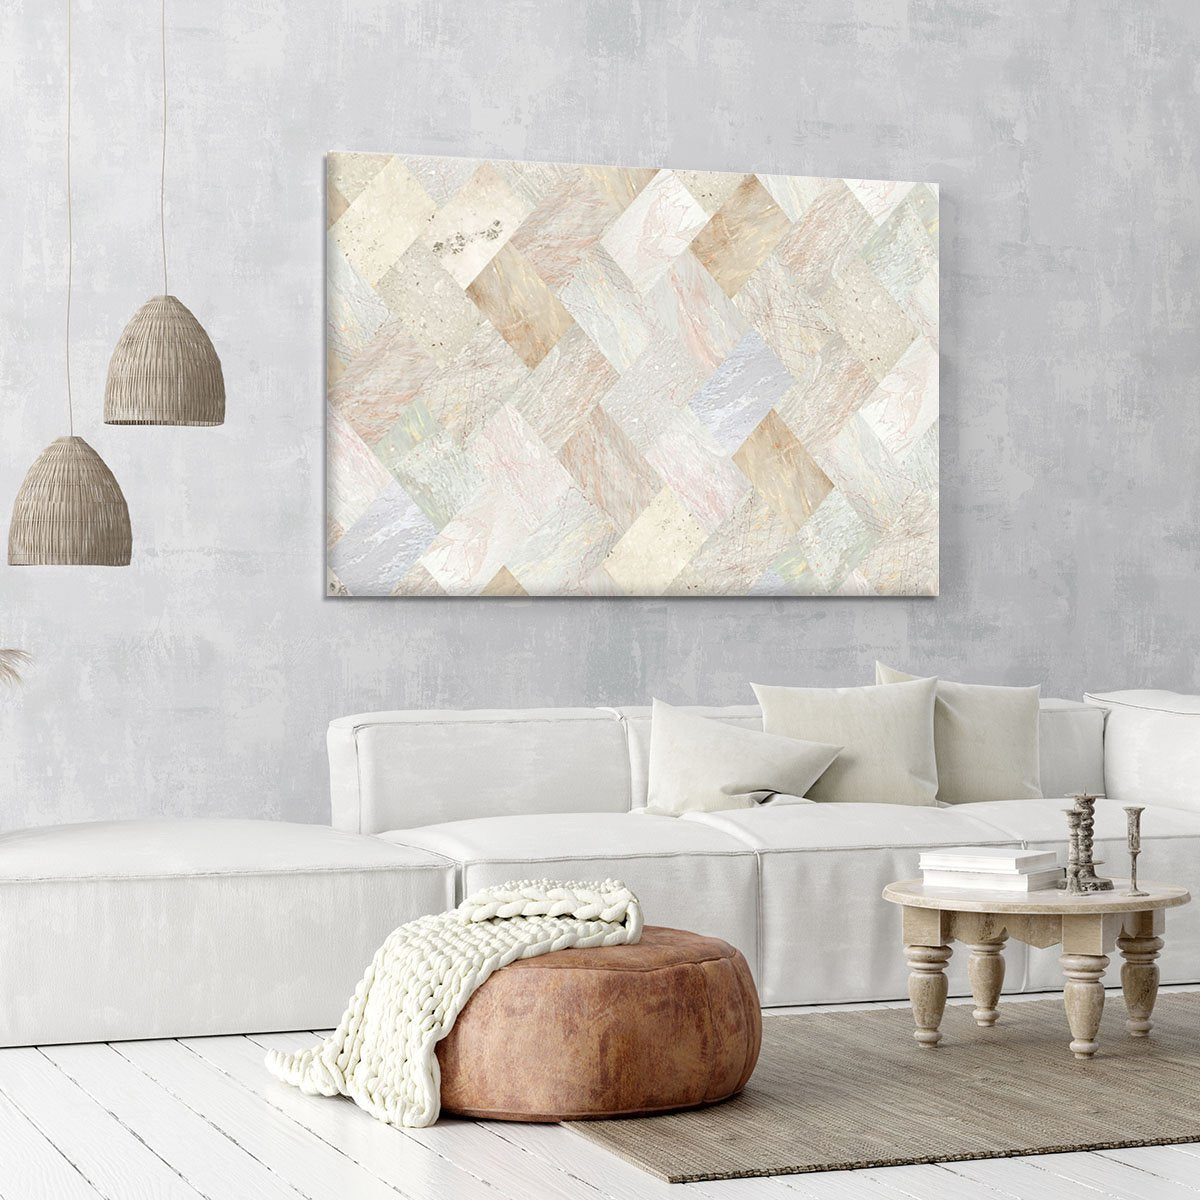 Netural Patterned Marble Canvas Print or Poster